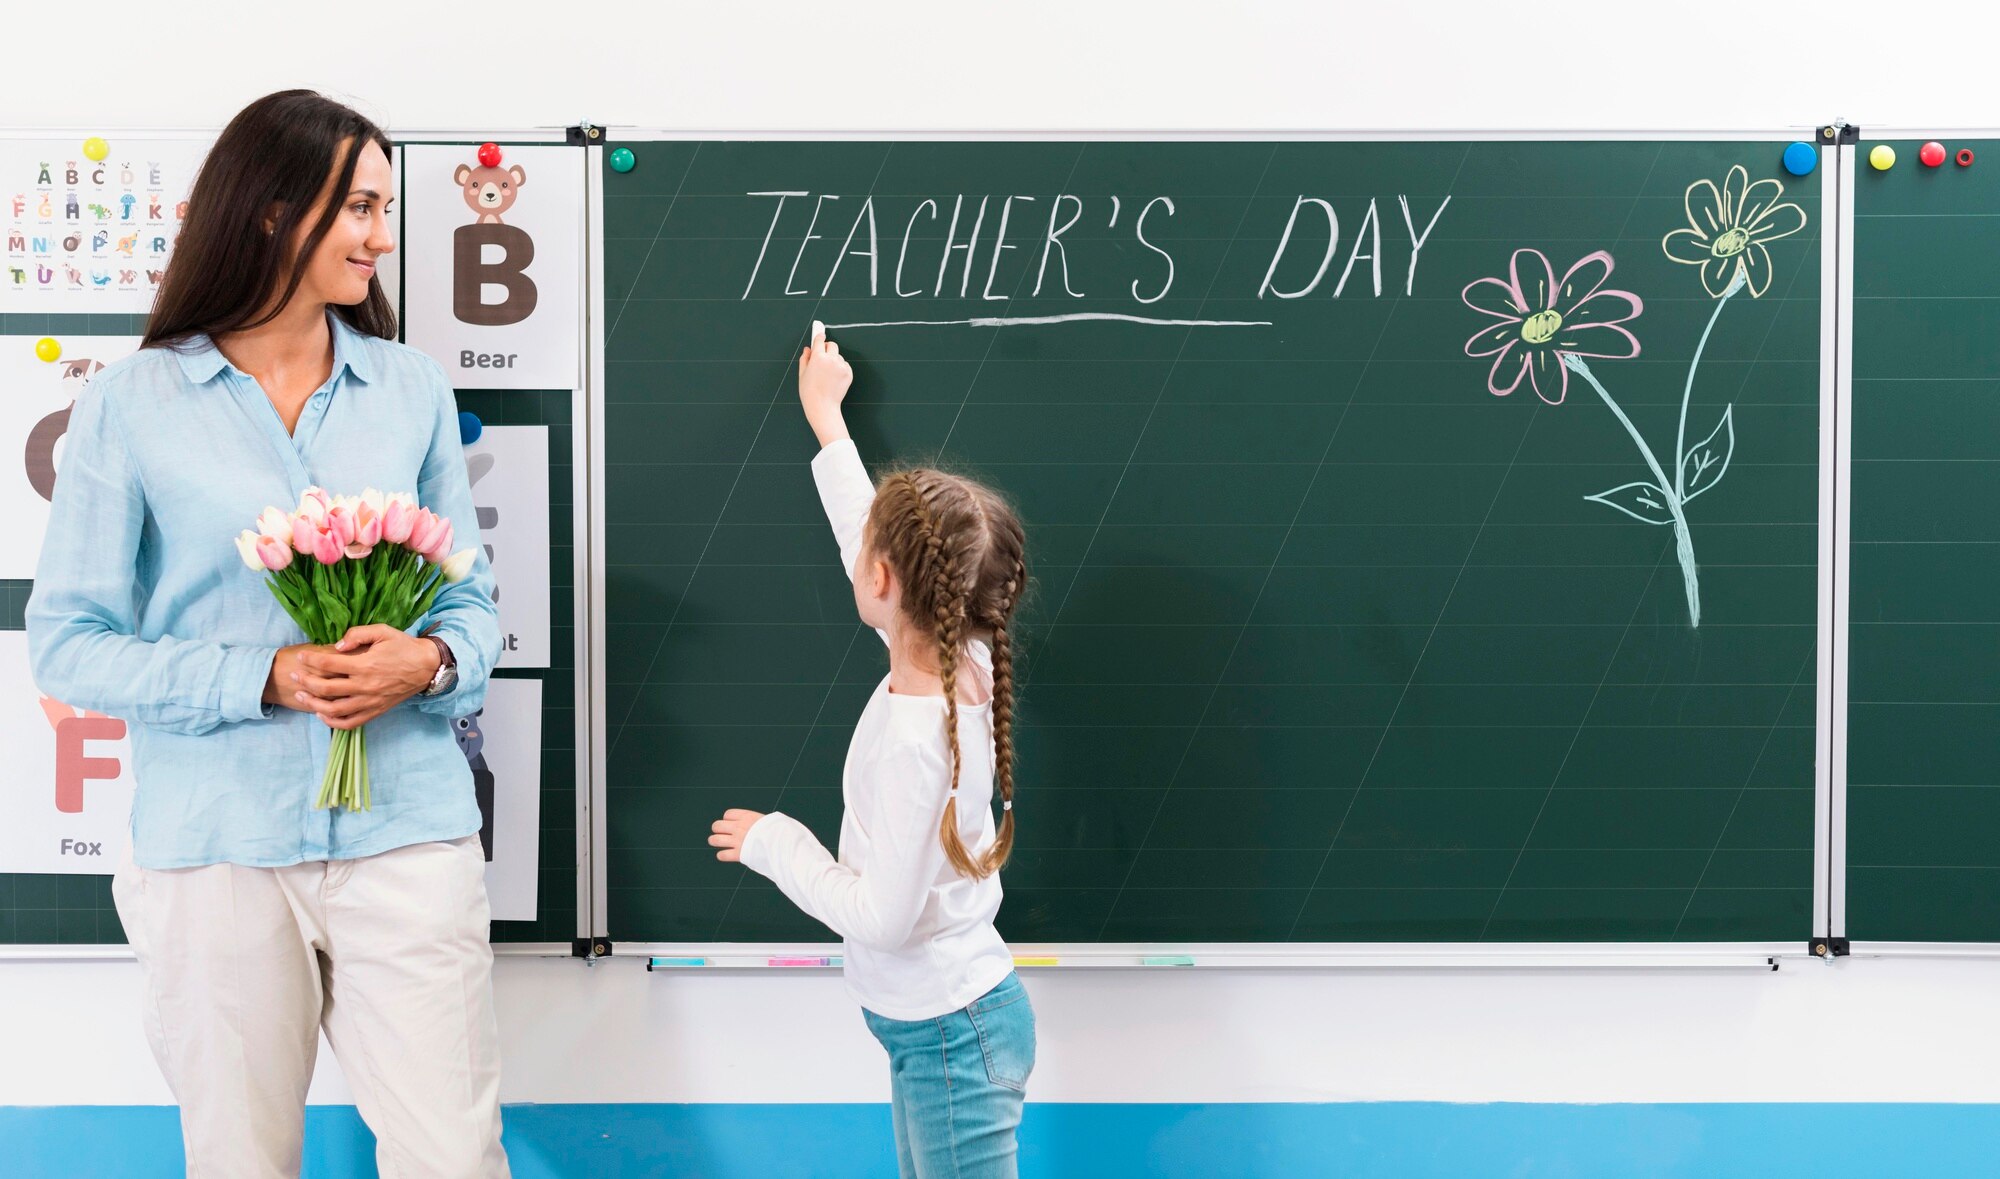 How To Make Your Present Ideas For Teacher Appreciation Day Extra Special